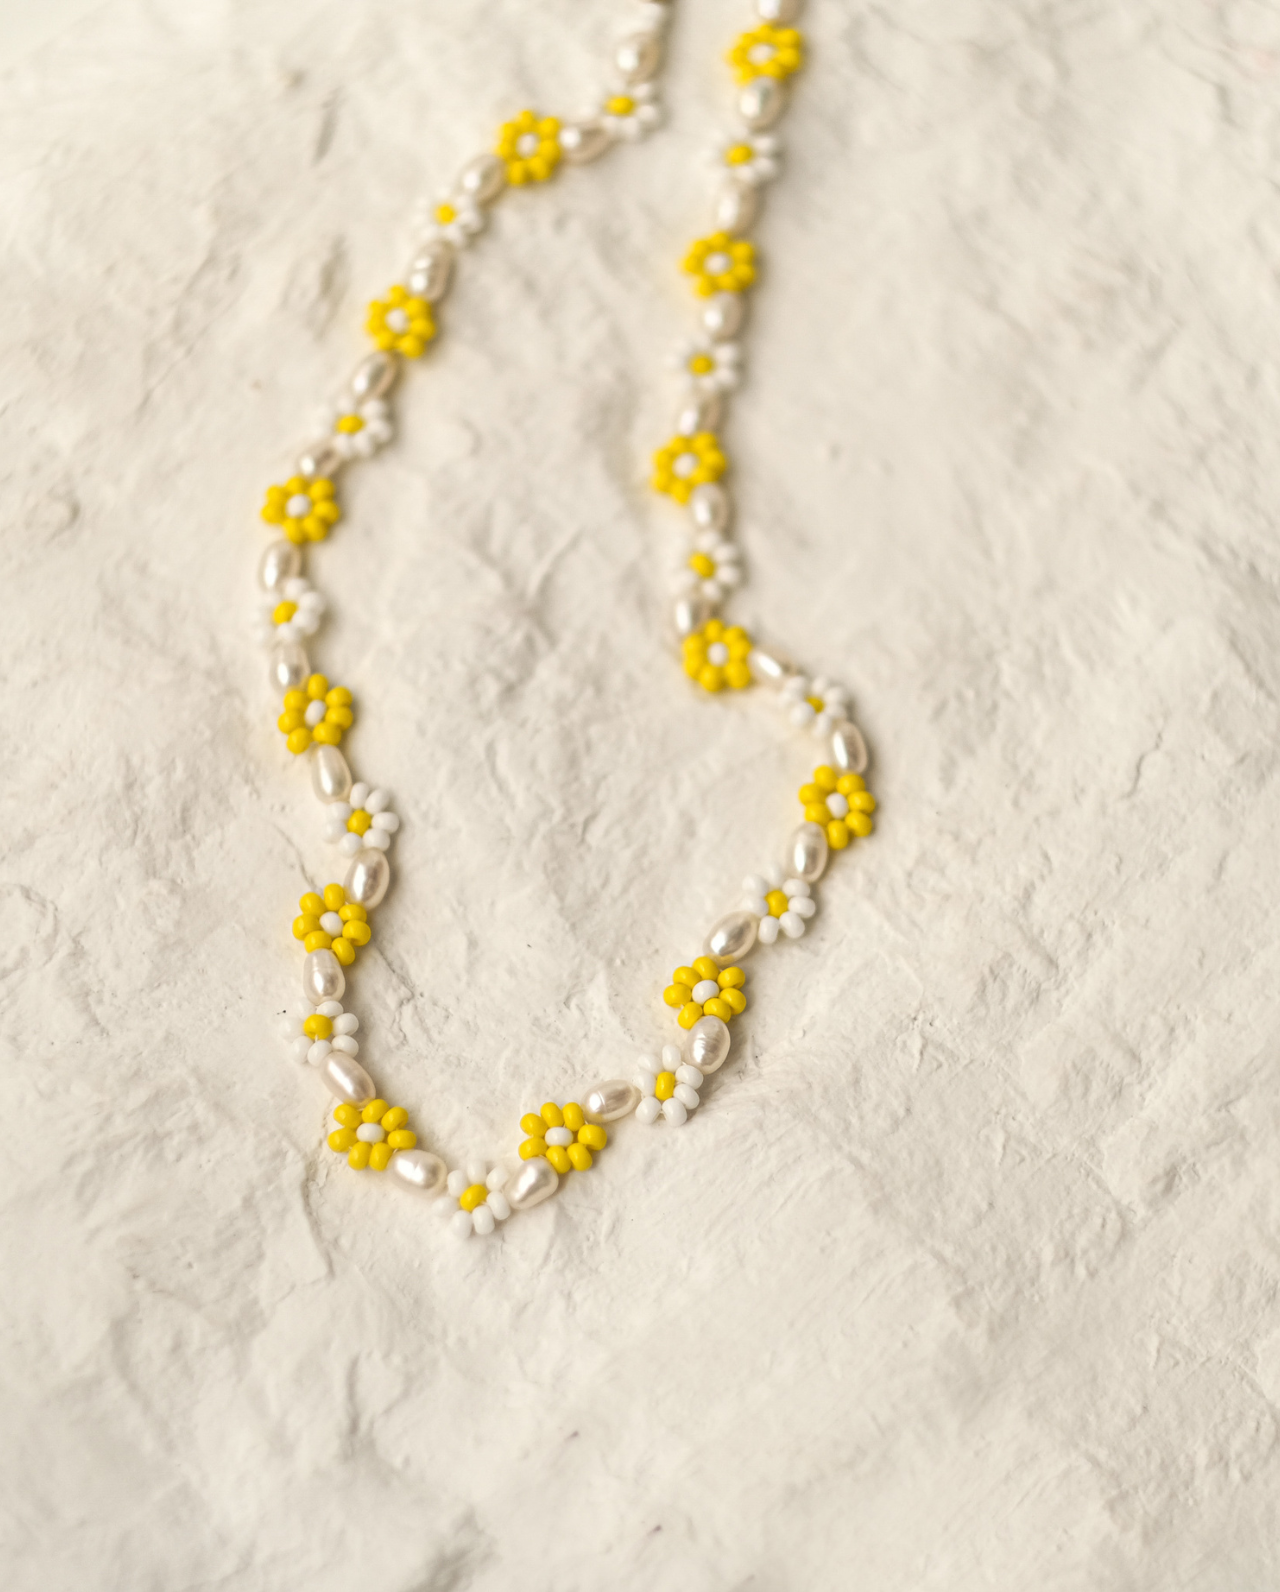 The Yellow Daisy Pearl Necklace